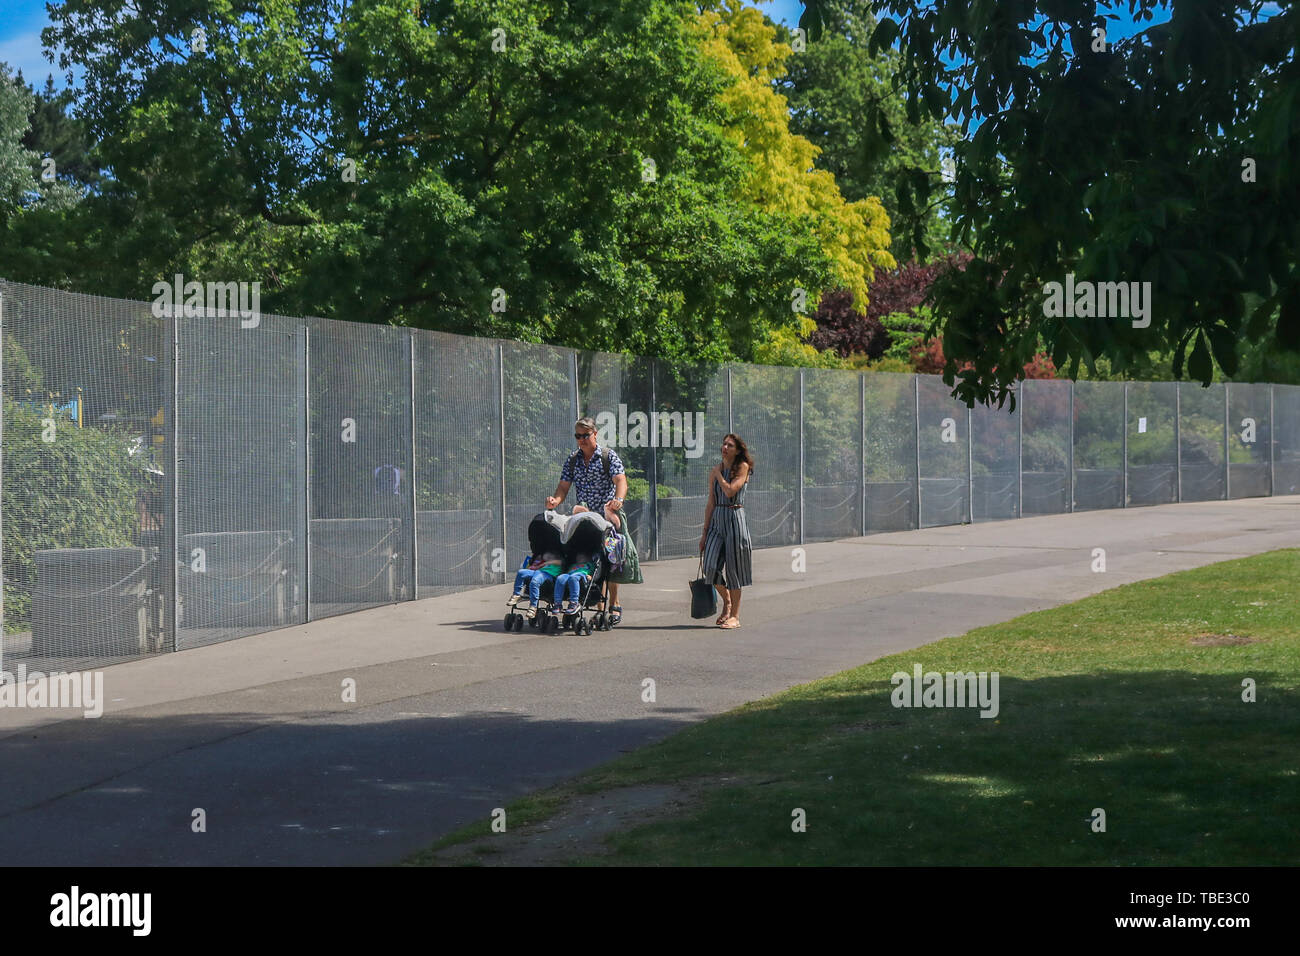 London UK. 1st June 2019. High steel mesh security fences are erected around the perimeter of the American Ambassador's residence at Winfield House in Regent's  Park ahead of the State Visit of US President Donald Trump London UK. 1st June 2019. The minaret of  Regent's Park mosque seen next to security fences which have been installed around Winfield House residence of the Ambassador of the United States of America in Regent's Park ahead of the State Visit of President Donald Trump Credit: amer ghazzal/Alamy Live News Stock Photo